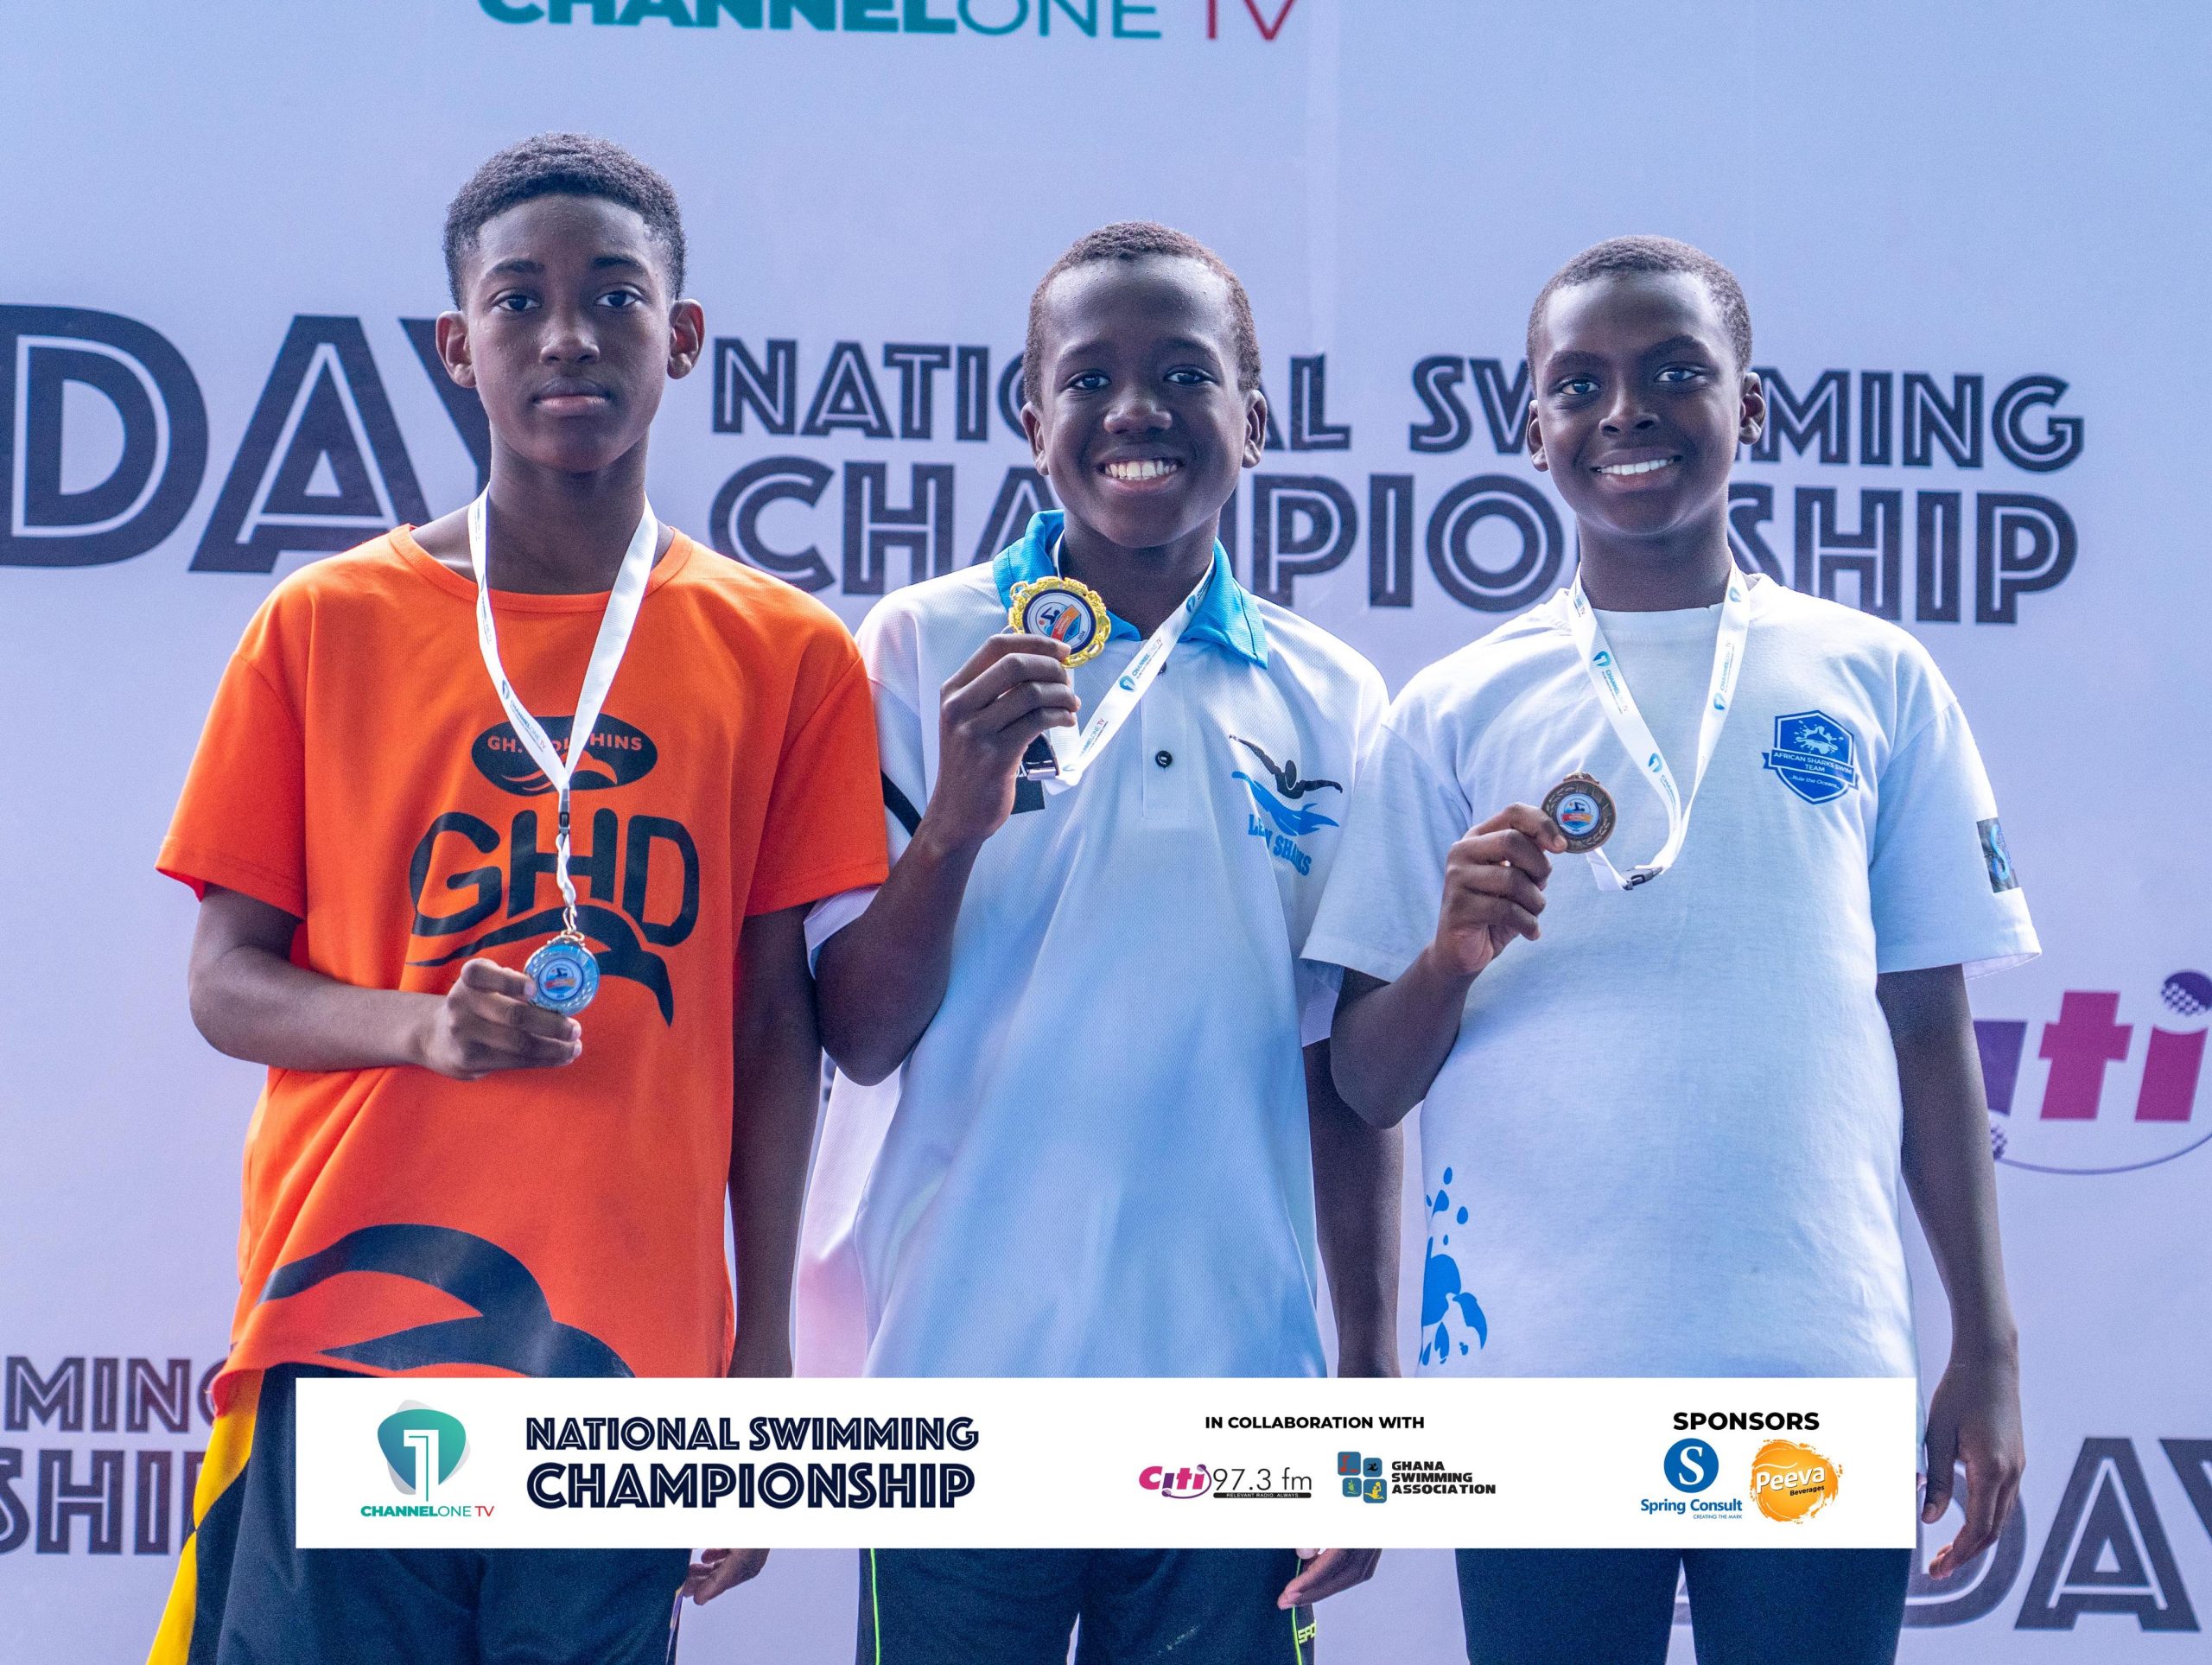 Legon swimming Club tops 2024 Channel One TV’s National Swimming Championship with 179 medals